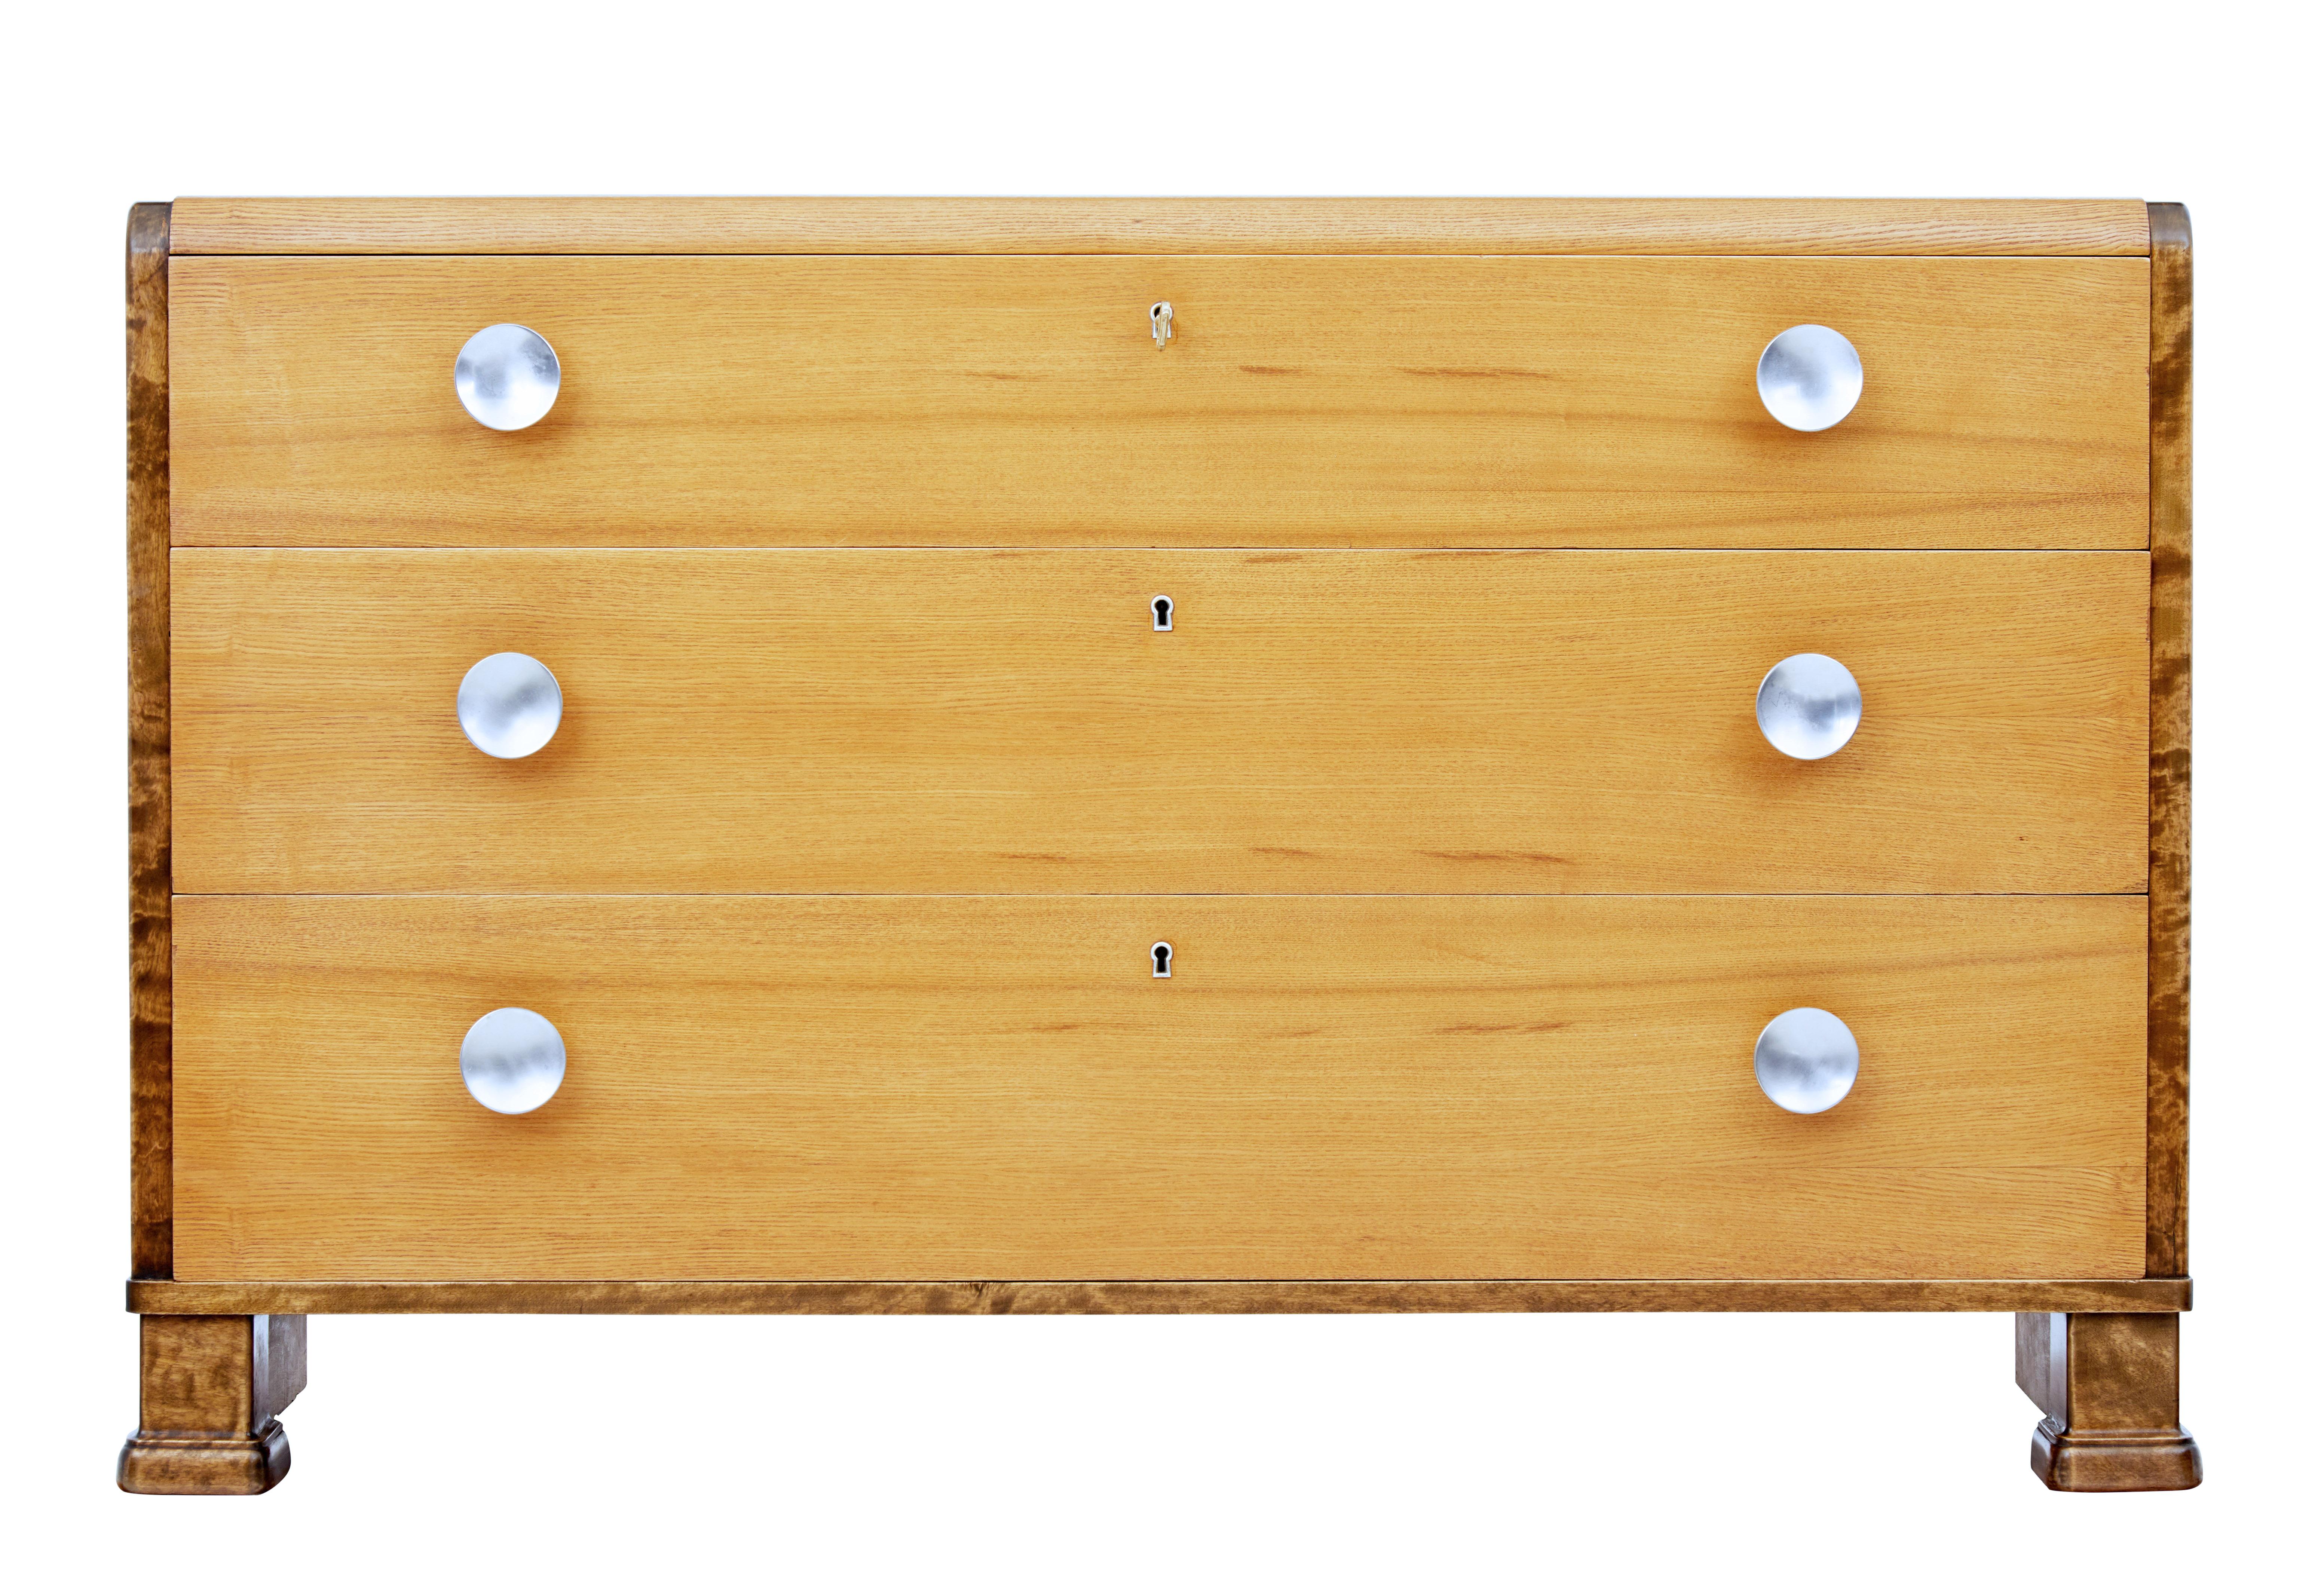 Stunning Scandinavian Modern chest of drawers, circa 1950.

Rich elm 3-drawer chest of drawers, with brushed steel handles. Shaped rounded top with burr birch sides.

A fine example of Scandinavian deco furniture.